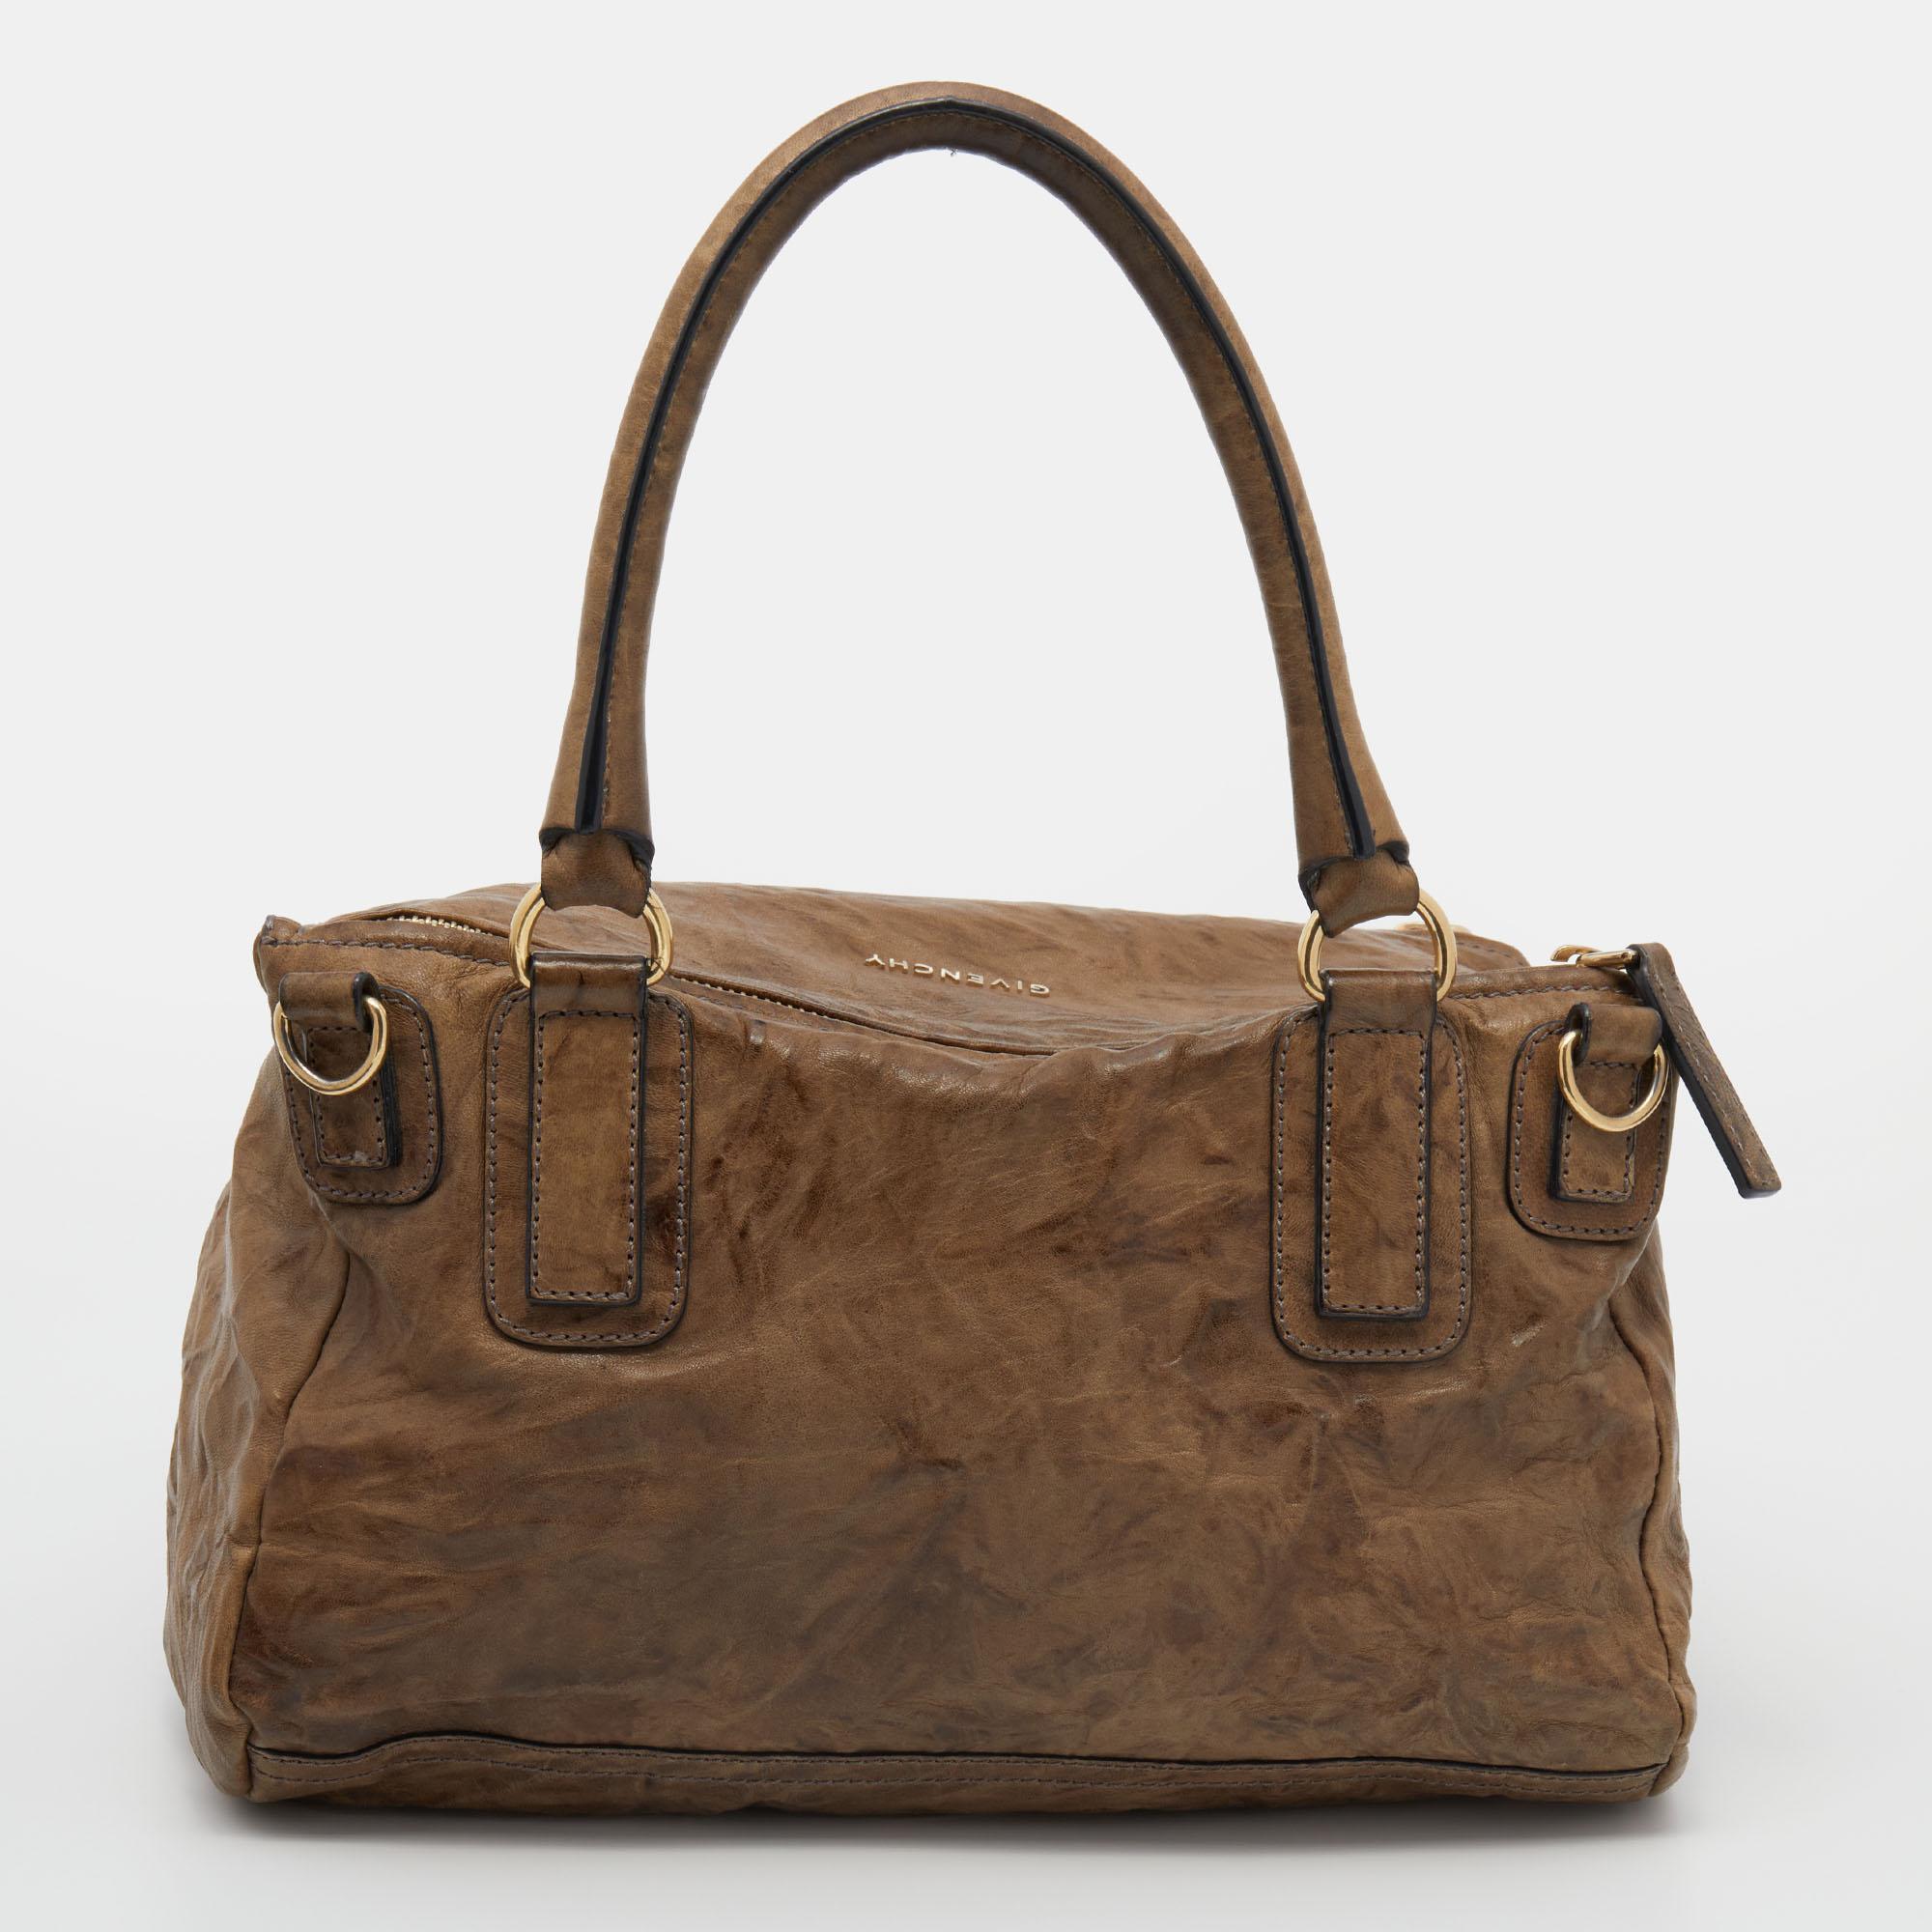 Durably fashionable, this Givenchy Pandora bag will prove to be an all-season favorite. This beautifully made bag has gold-tone metal additions, two different handles, and a front zip pocket. The fabric-lined interior is perfectly sized to house